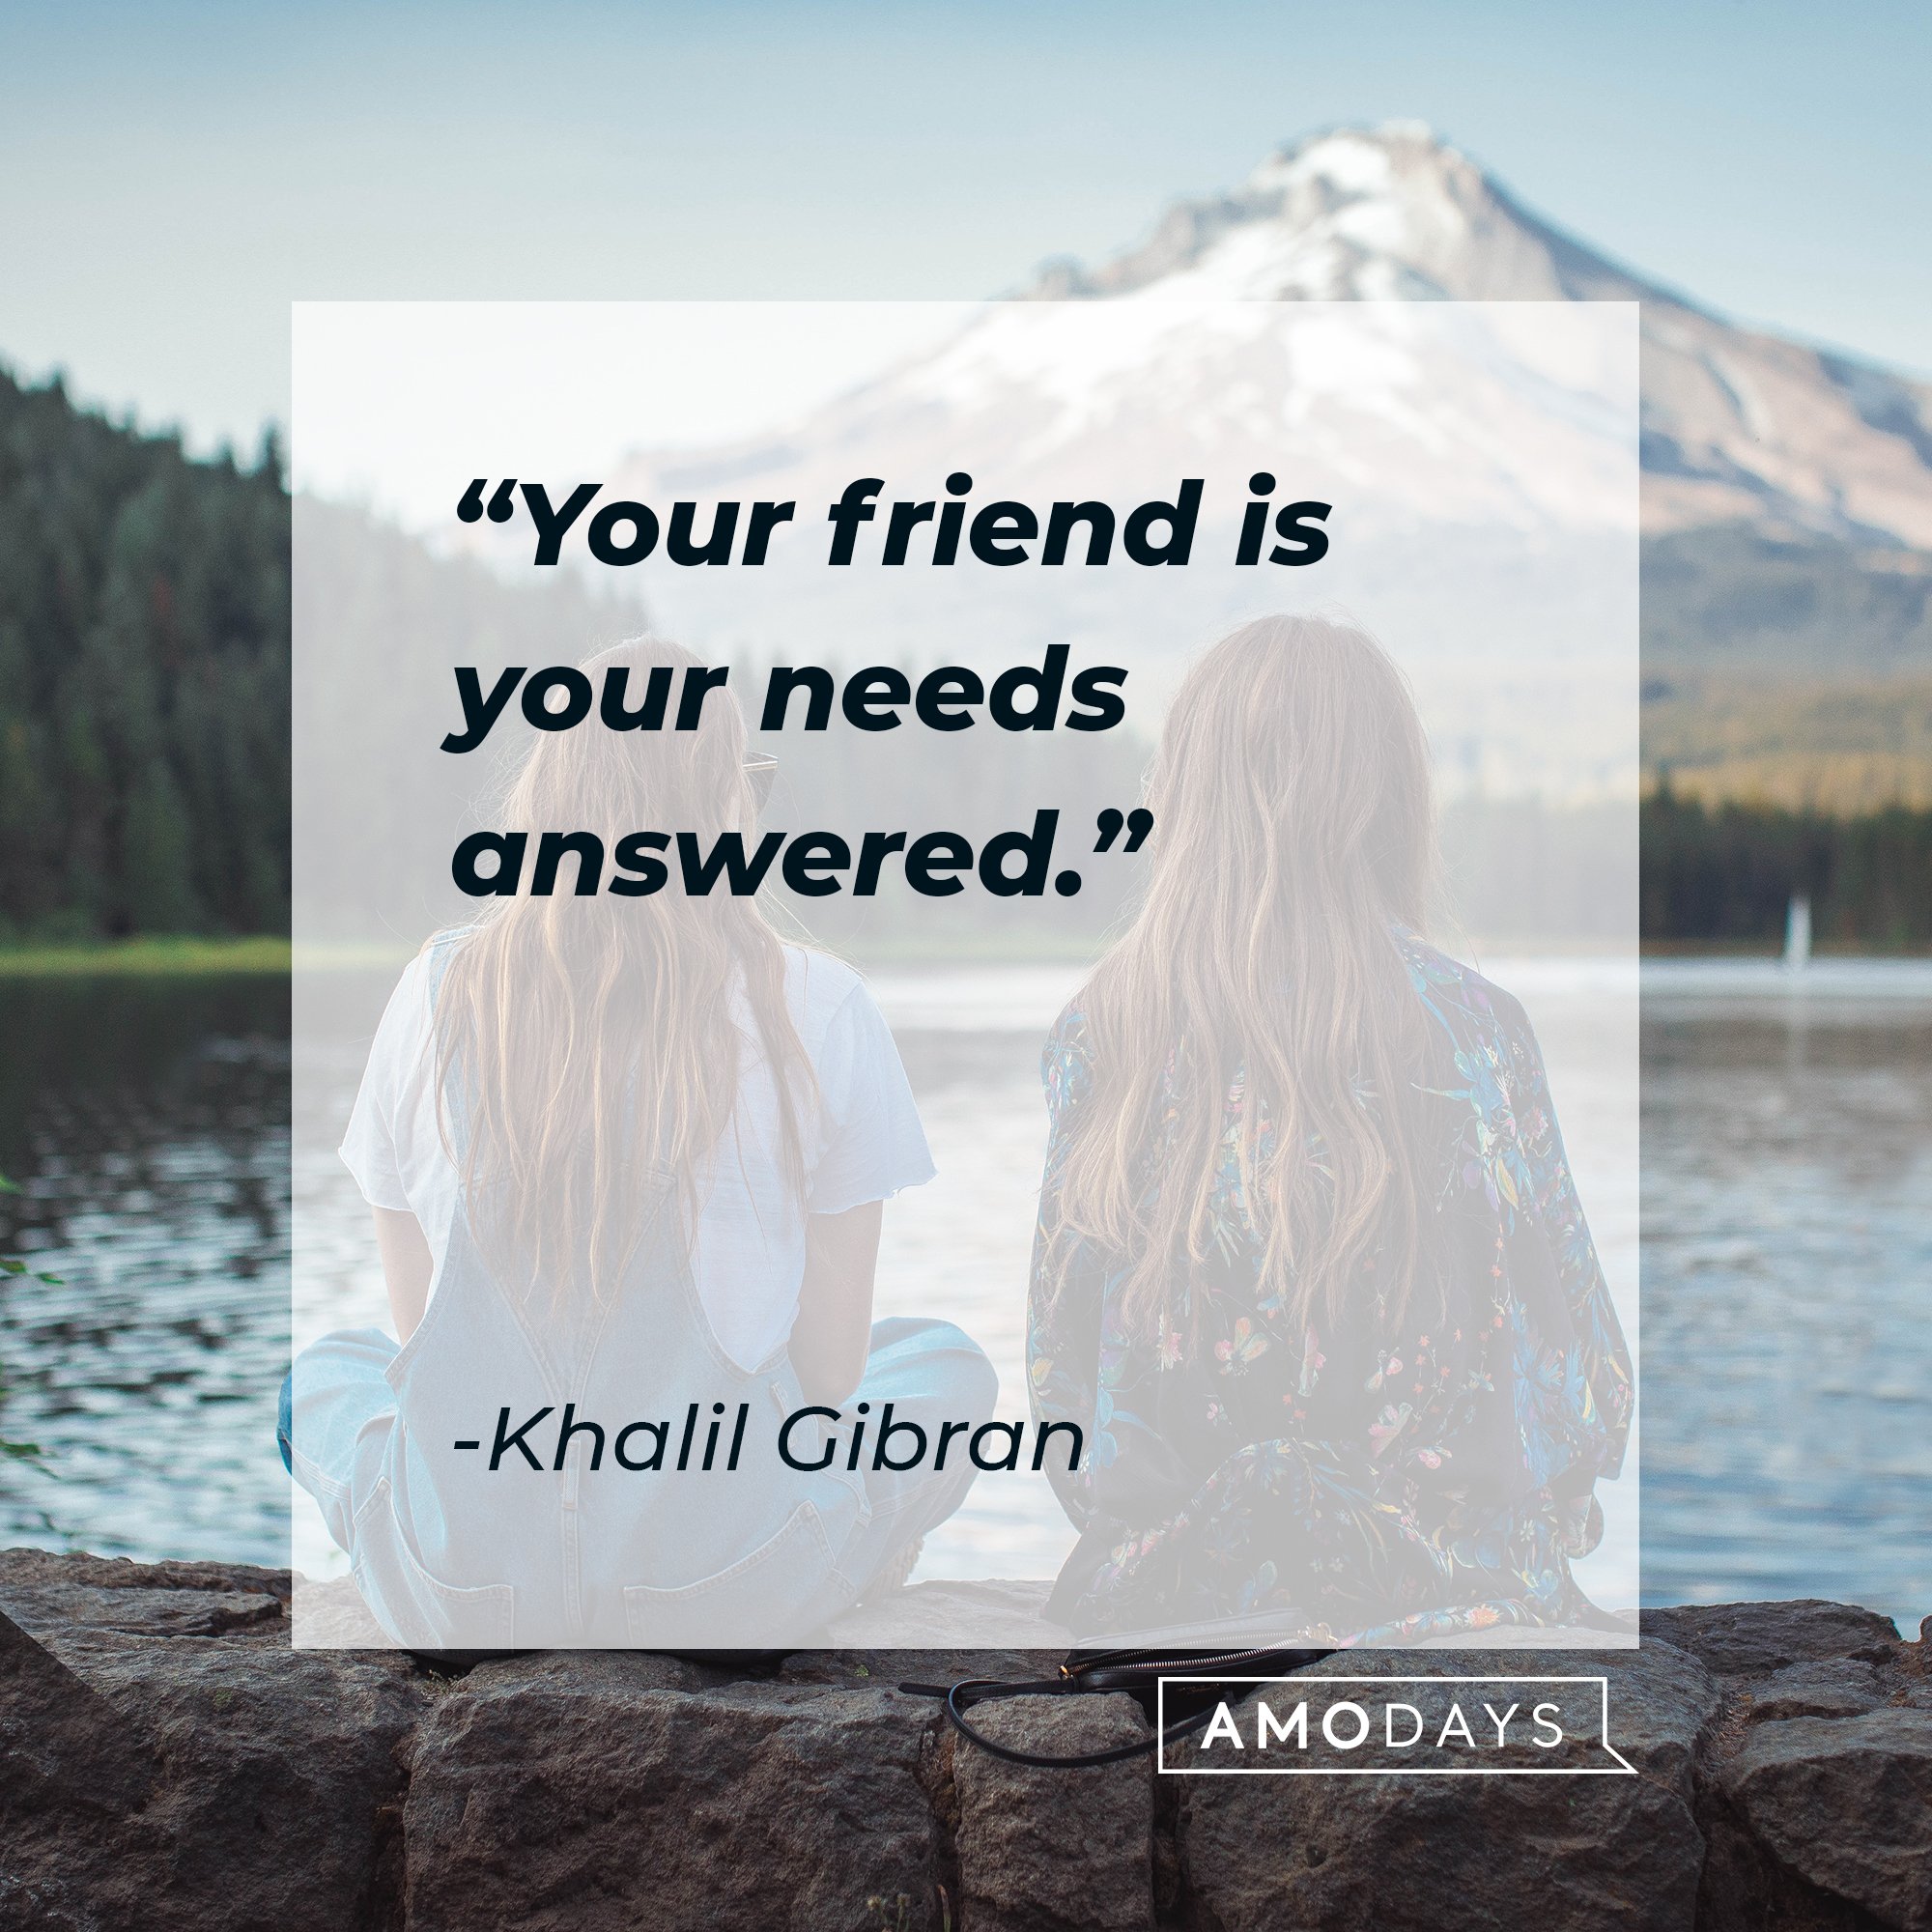  Khalil Gibran’s quote: “Your friend is your needs answered."  | Image: AmoDays 